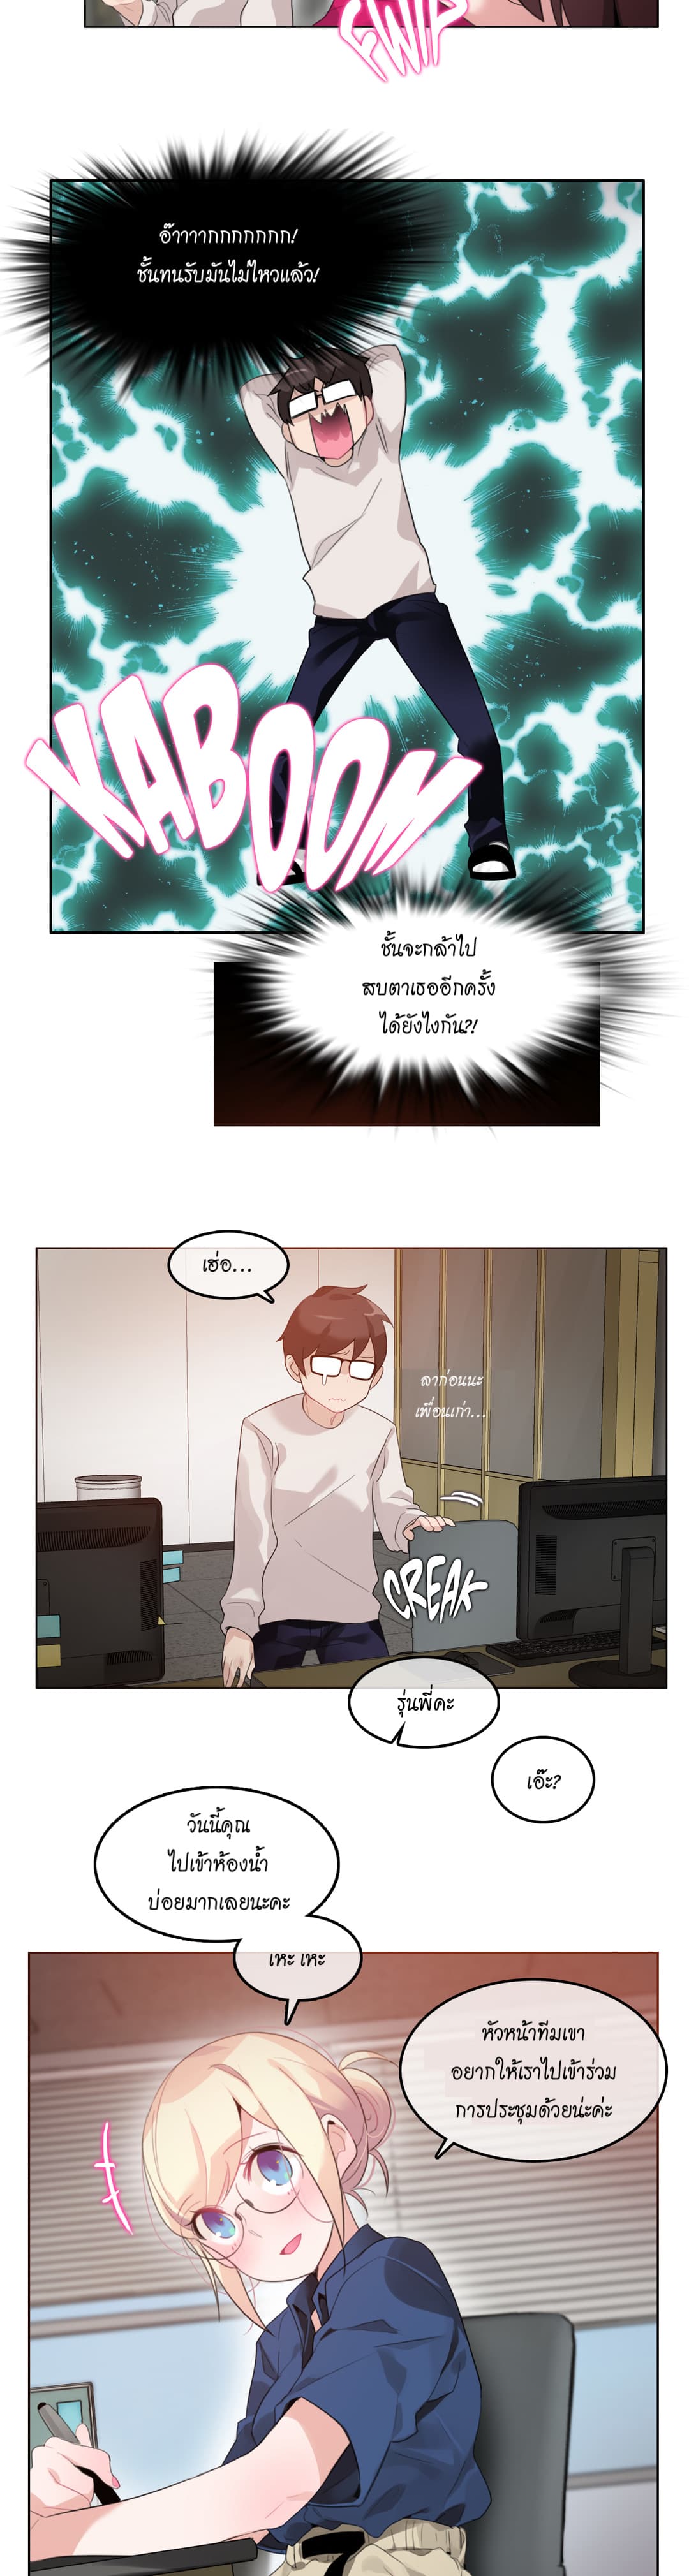 A Pervert’s Daily Life 26 (18)